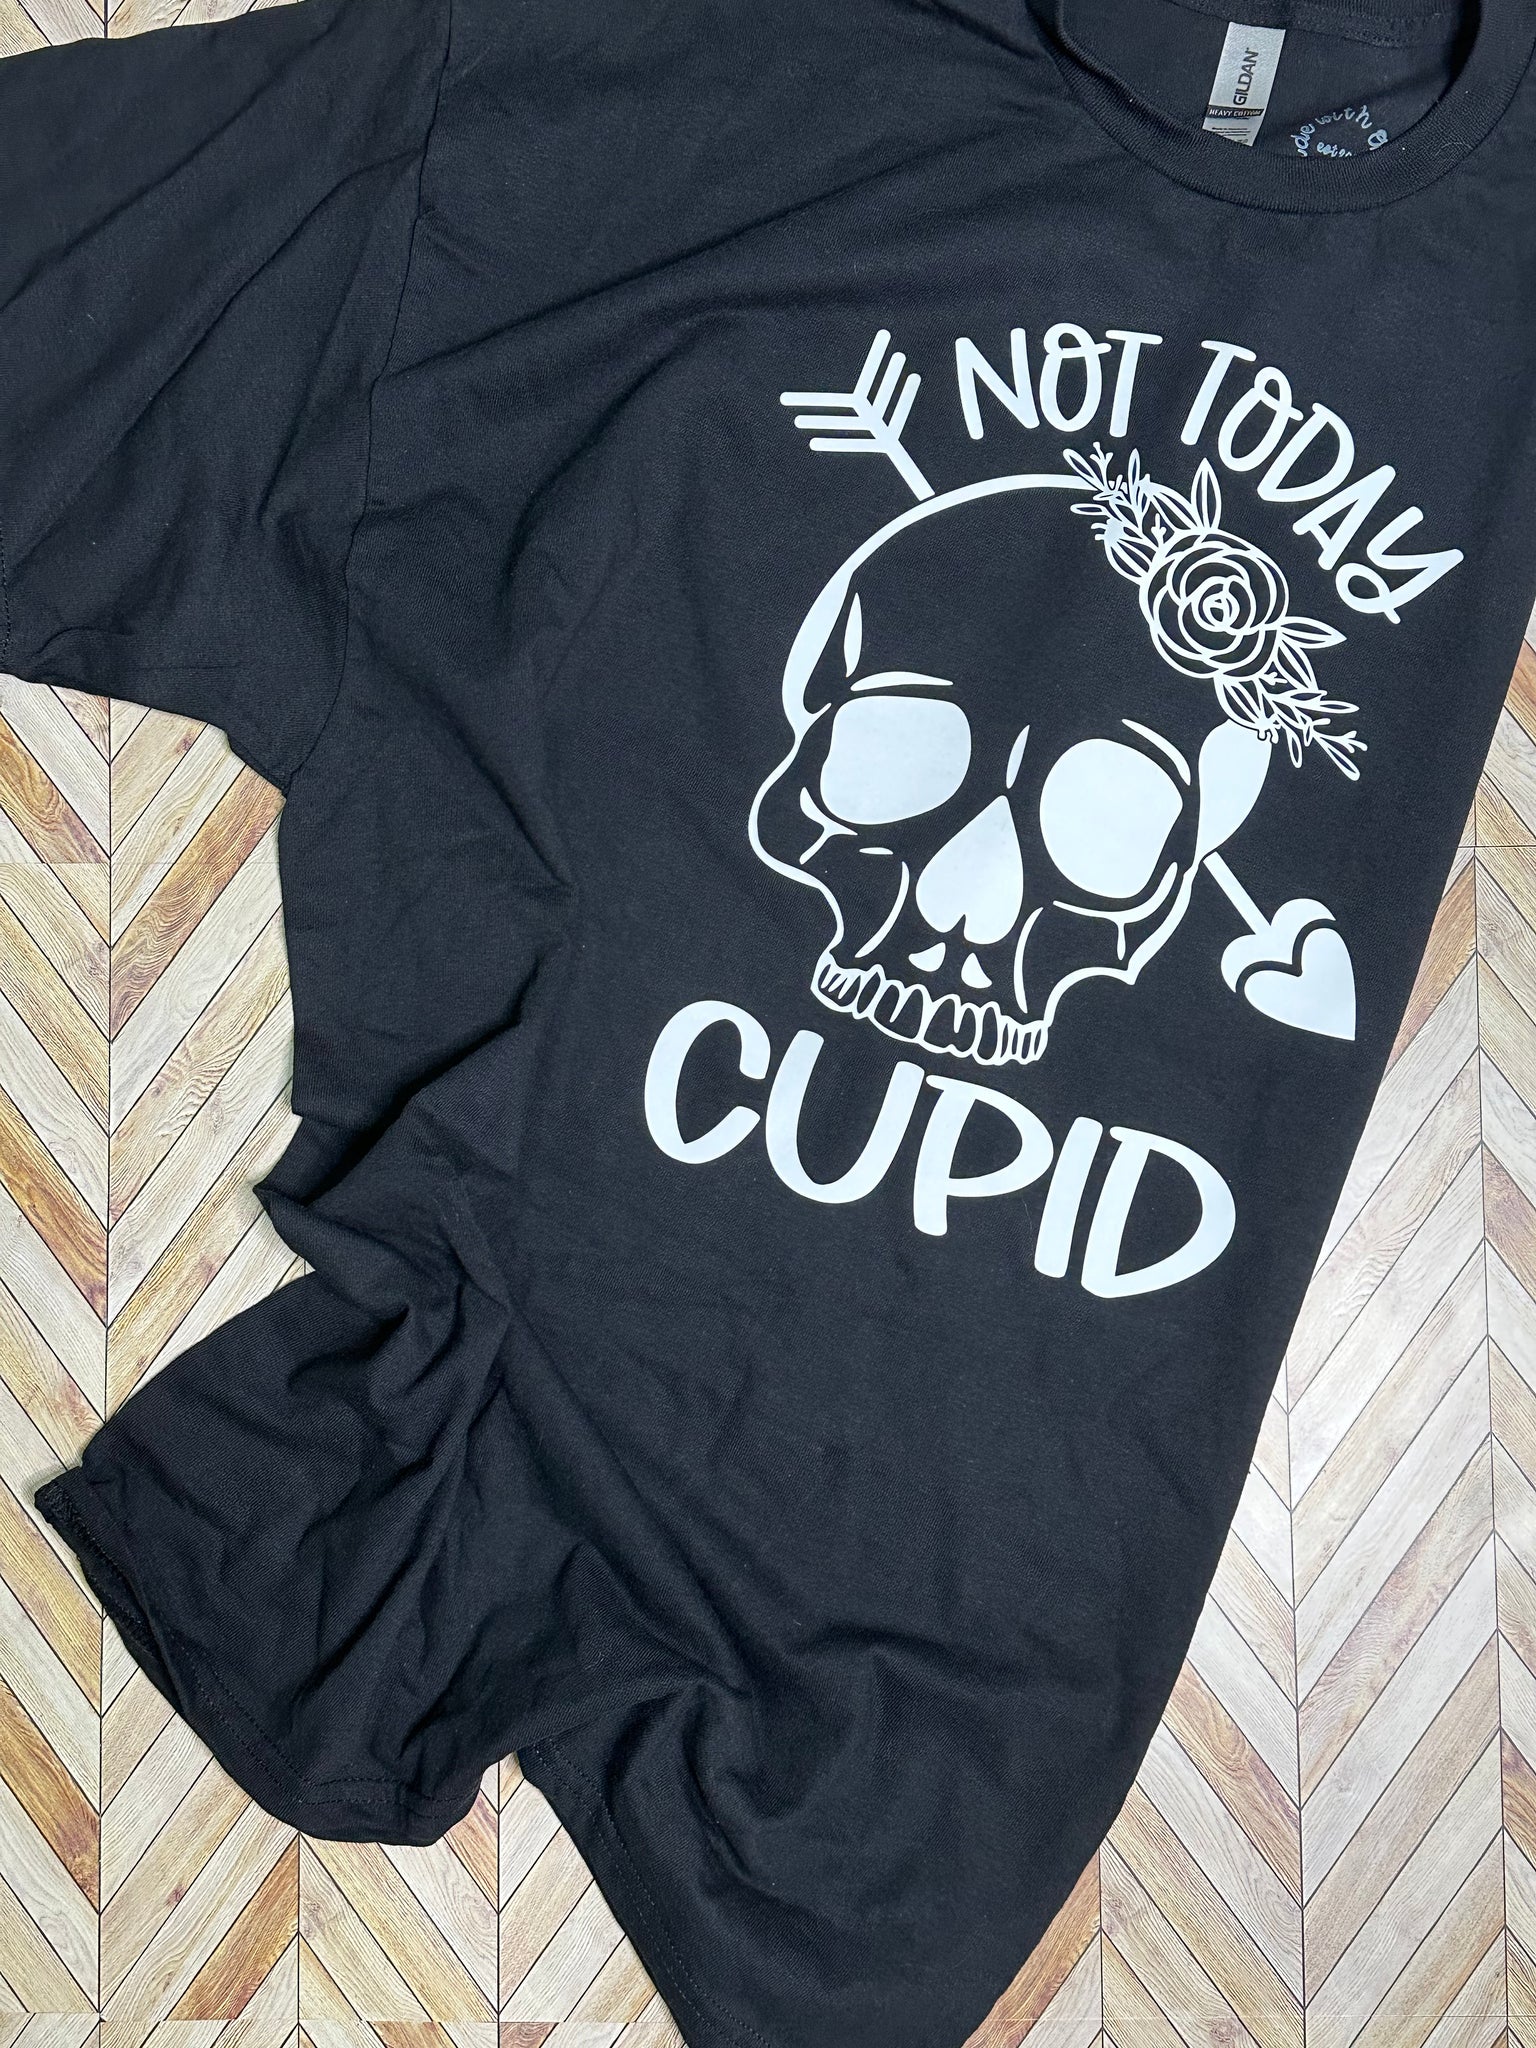 Not Today Cupid Shirt